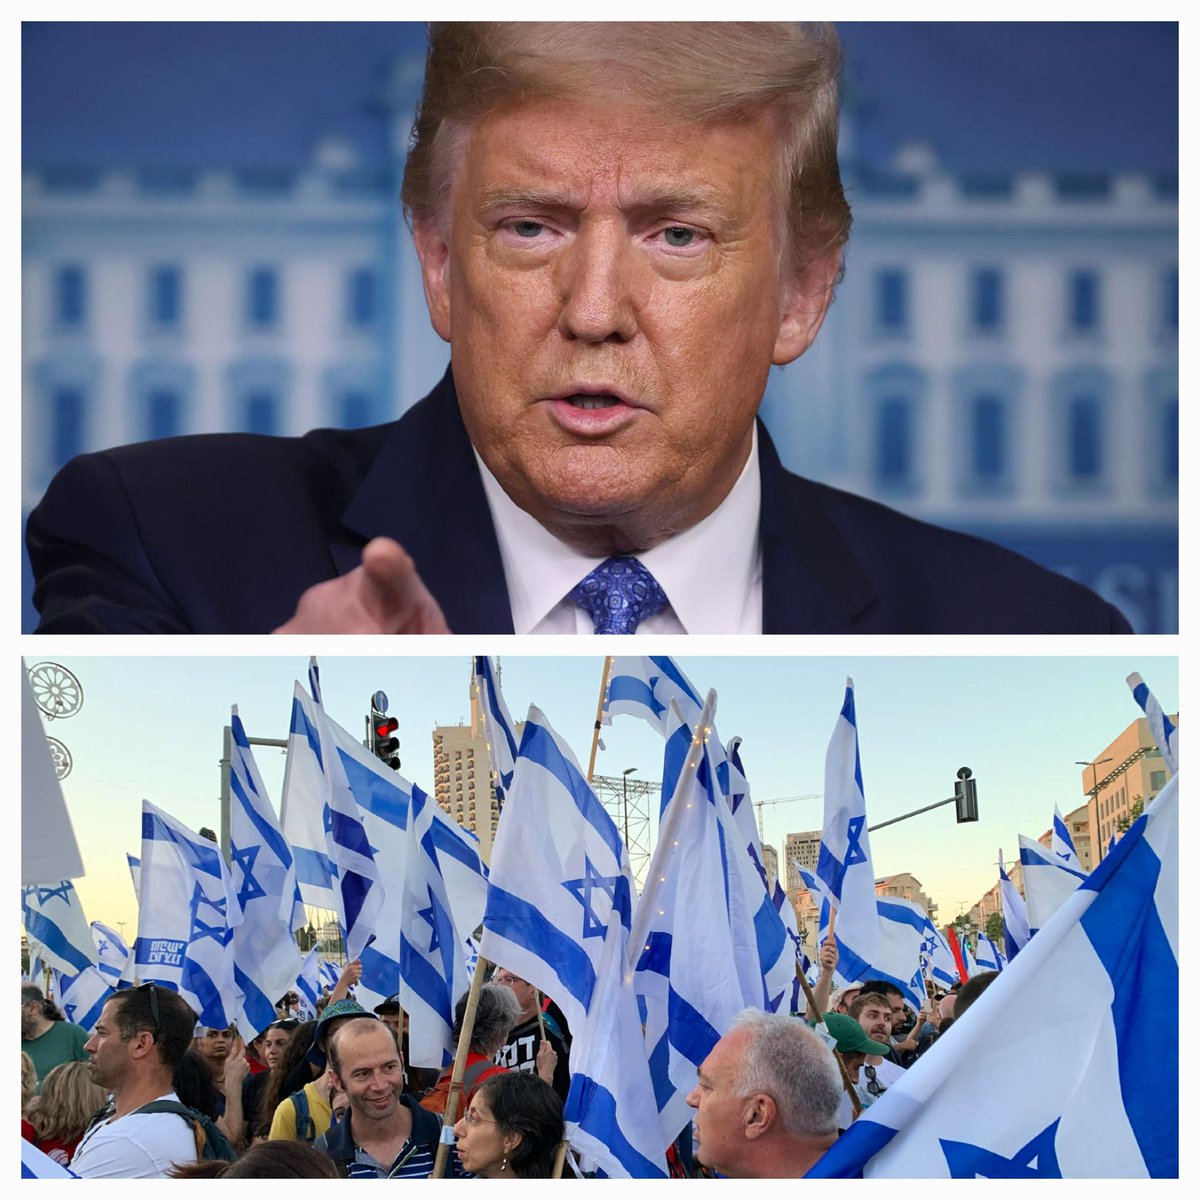 Tell me you're with me on two critical items. 1st, I support Trump. If you do, we agree & I urge you to retweet. #AmericaFirst 2nd, I support Israel. If you do too, GREAT! #StandWithIsrael Repost this if you agree!